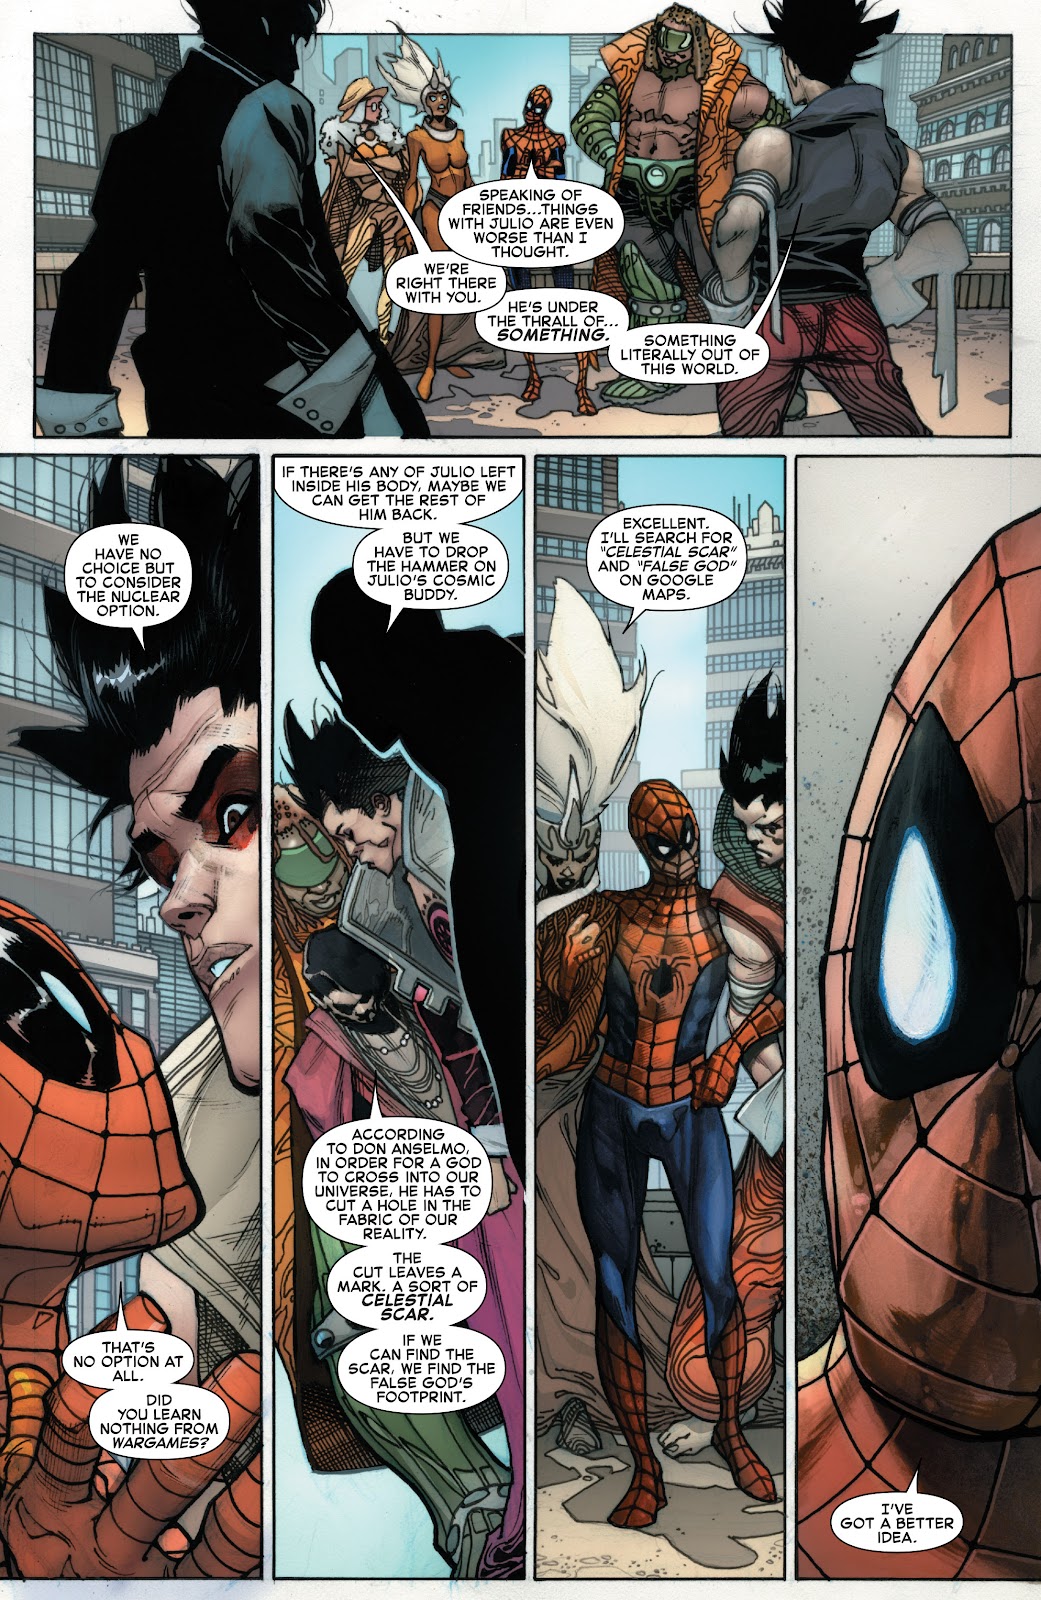 The Amazing Spider-Man (2015) issue 1.5 - Page 16